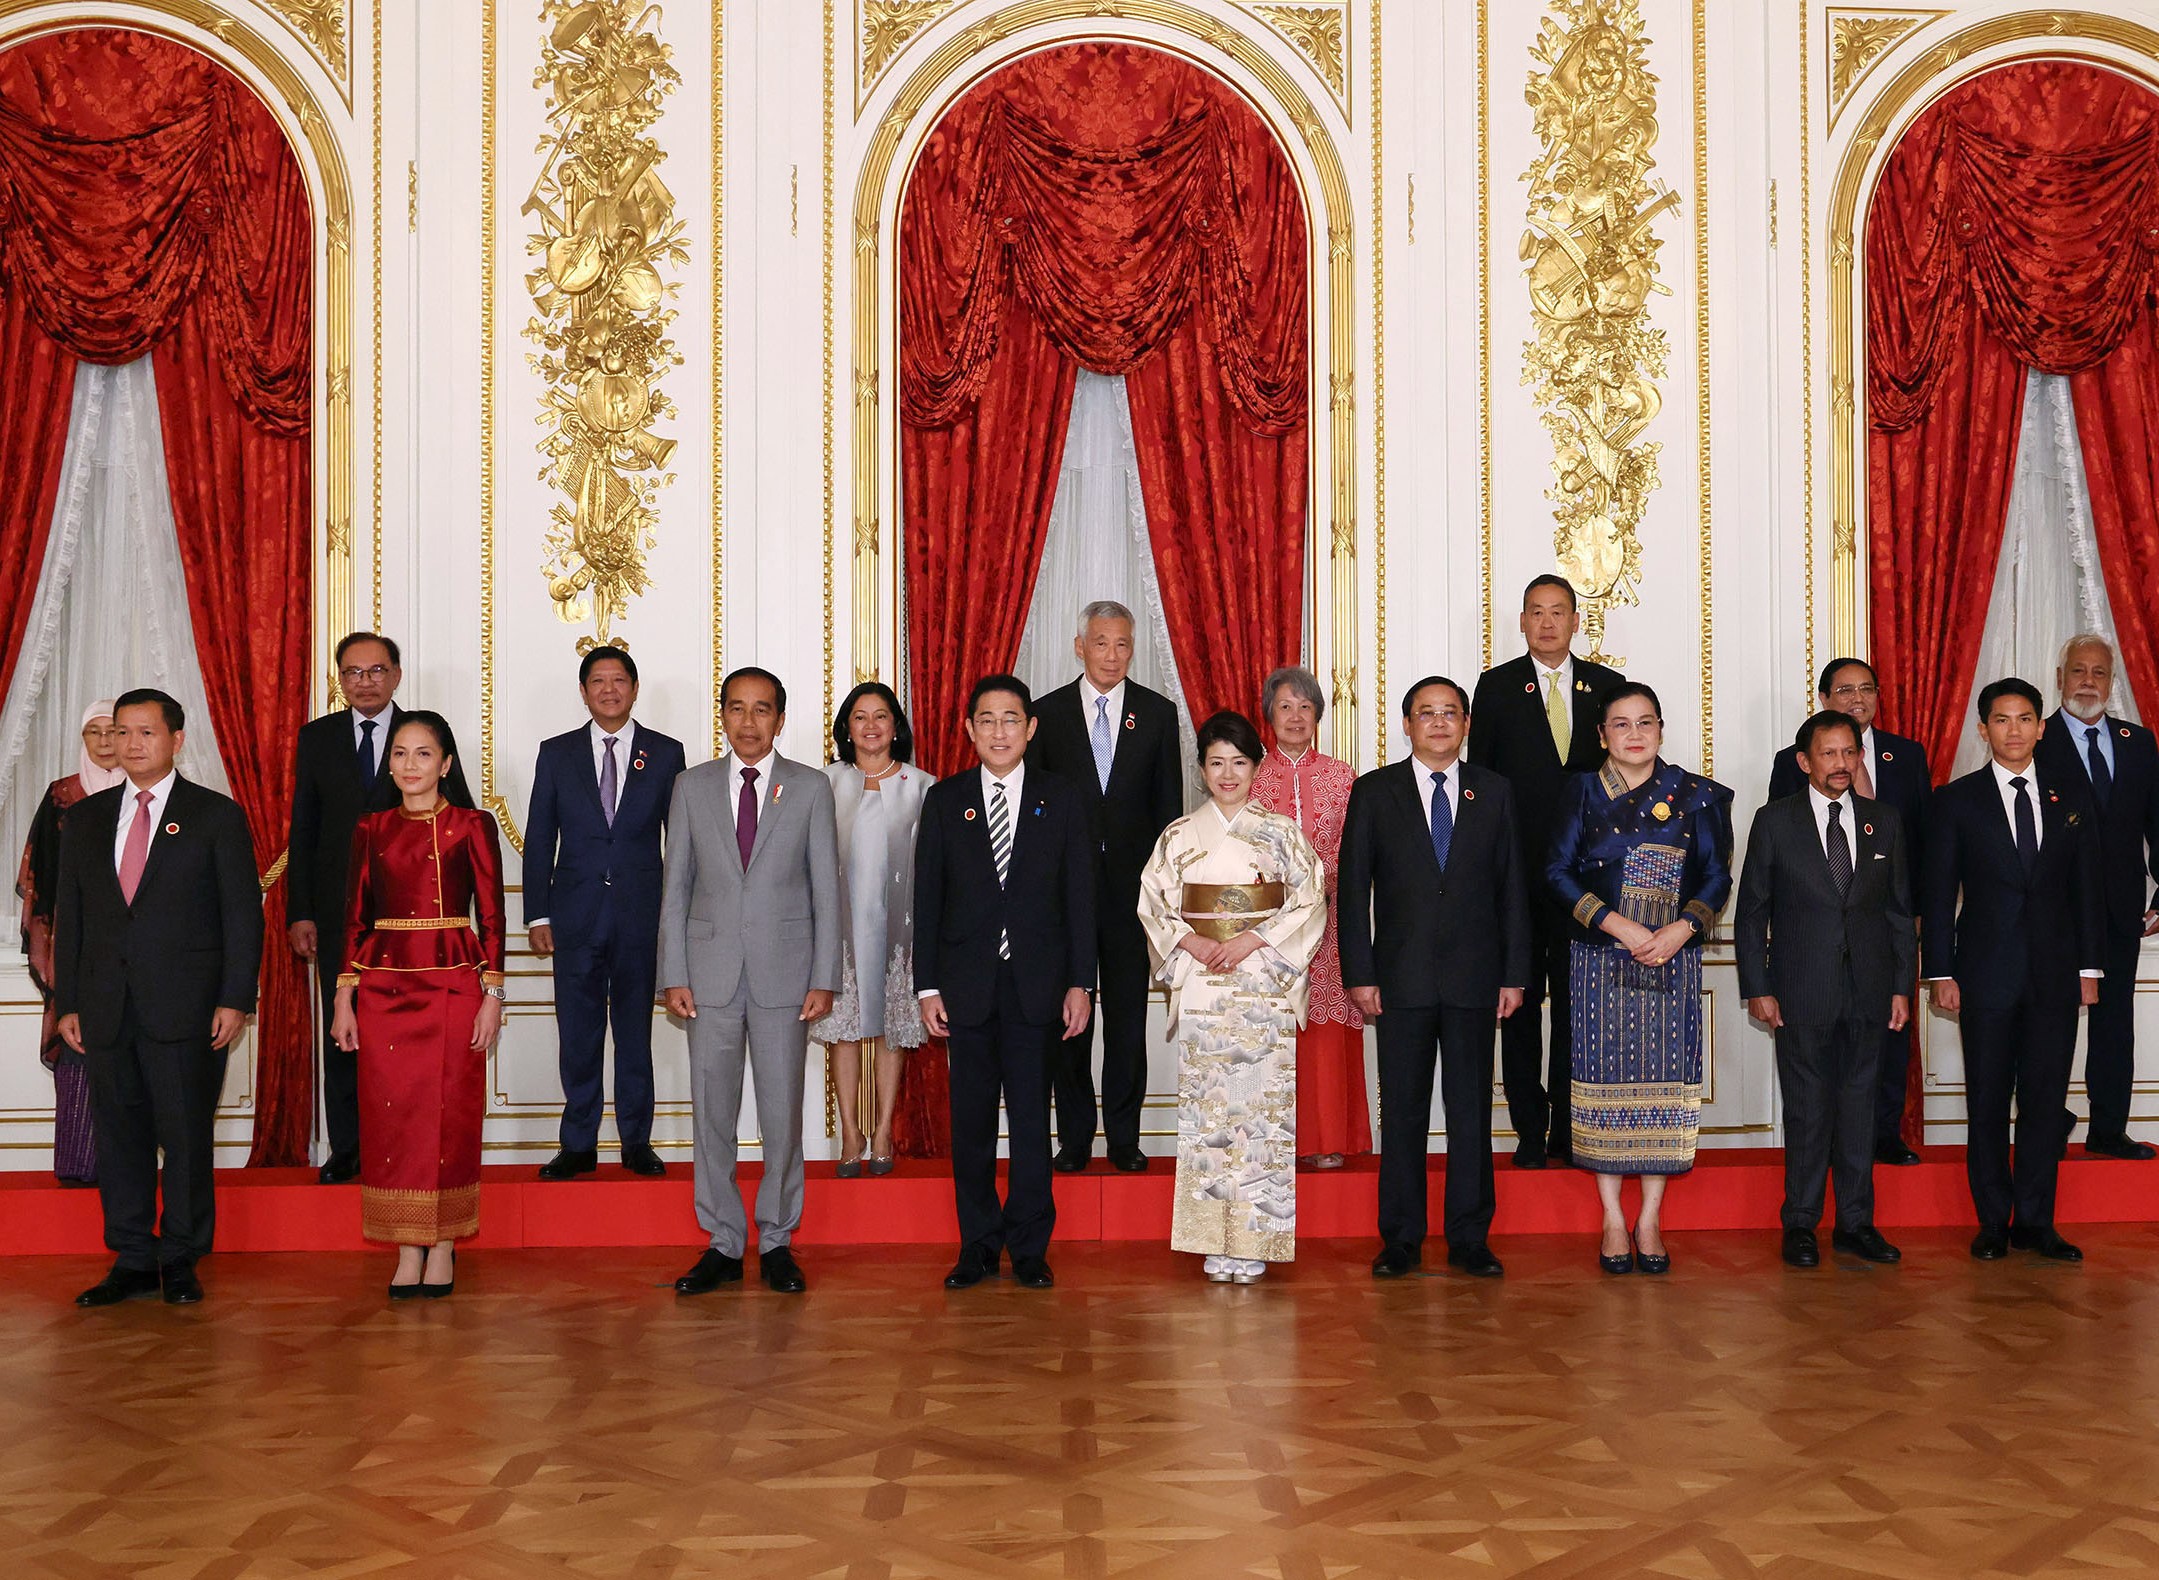 The Commemorative Summit for the 50th Year of ASEAN-Japan Friendship and Cooperation: Banquet hosted by Prime Minister KISHIDA and Mrs. KISHIDA